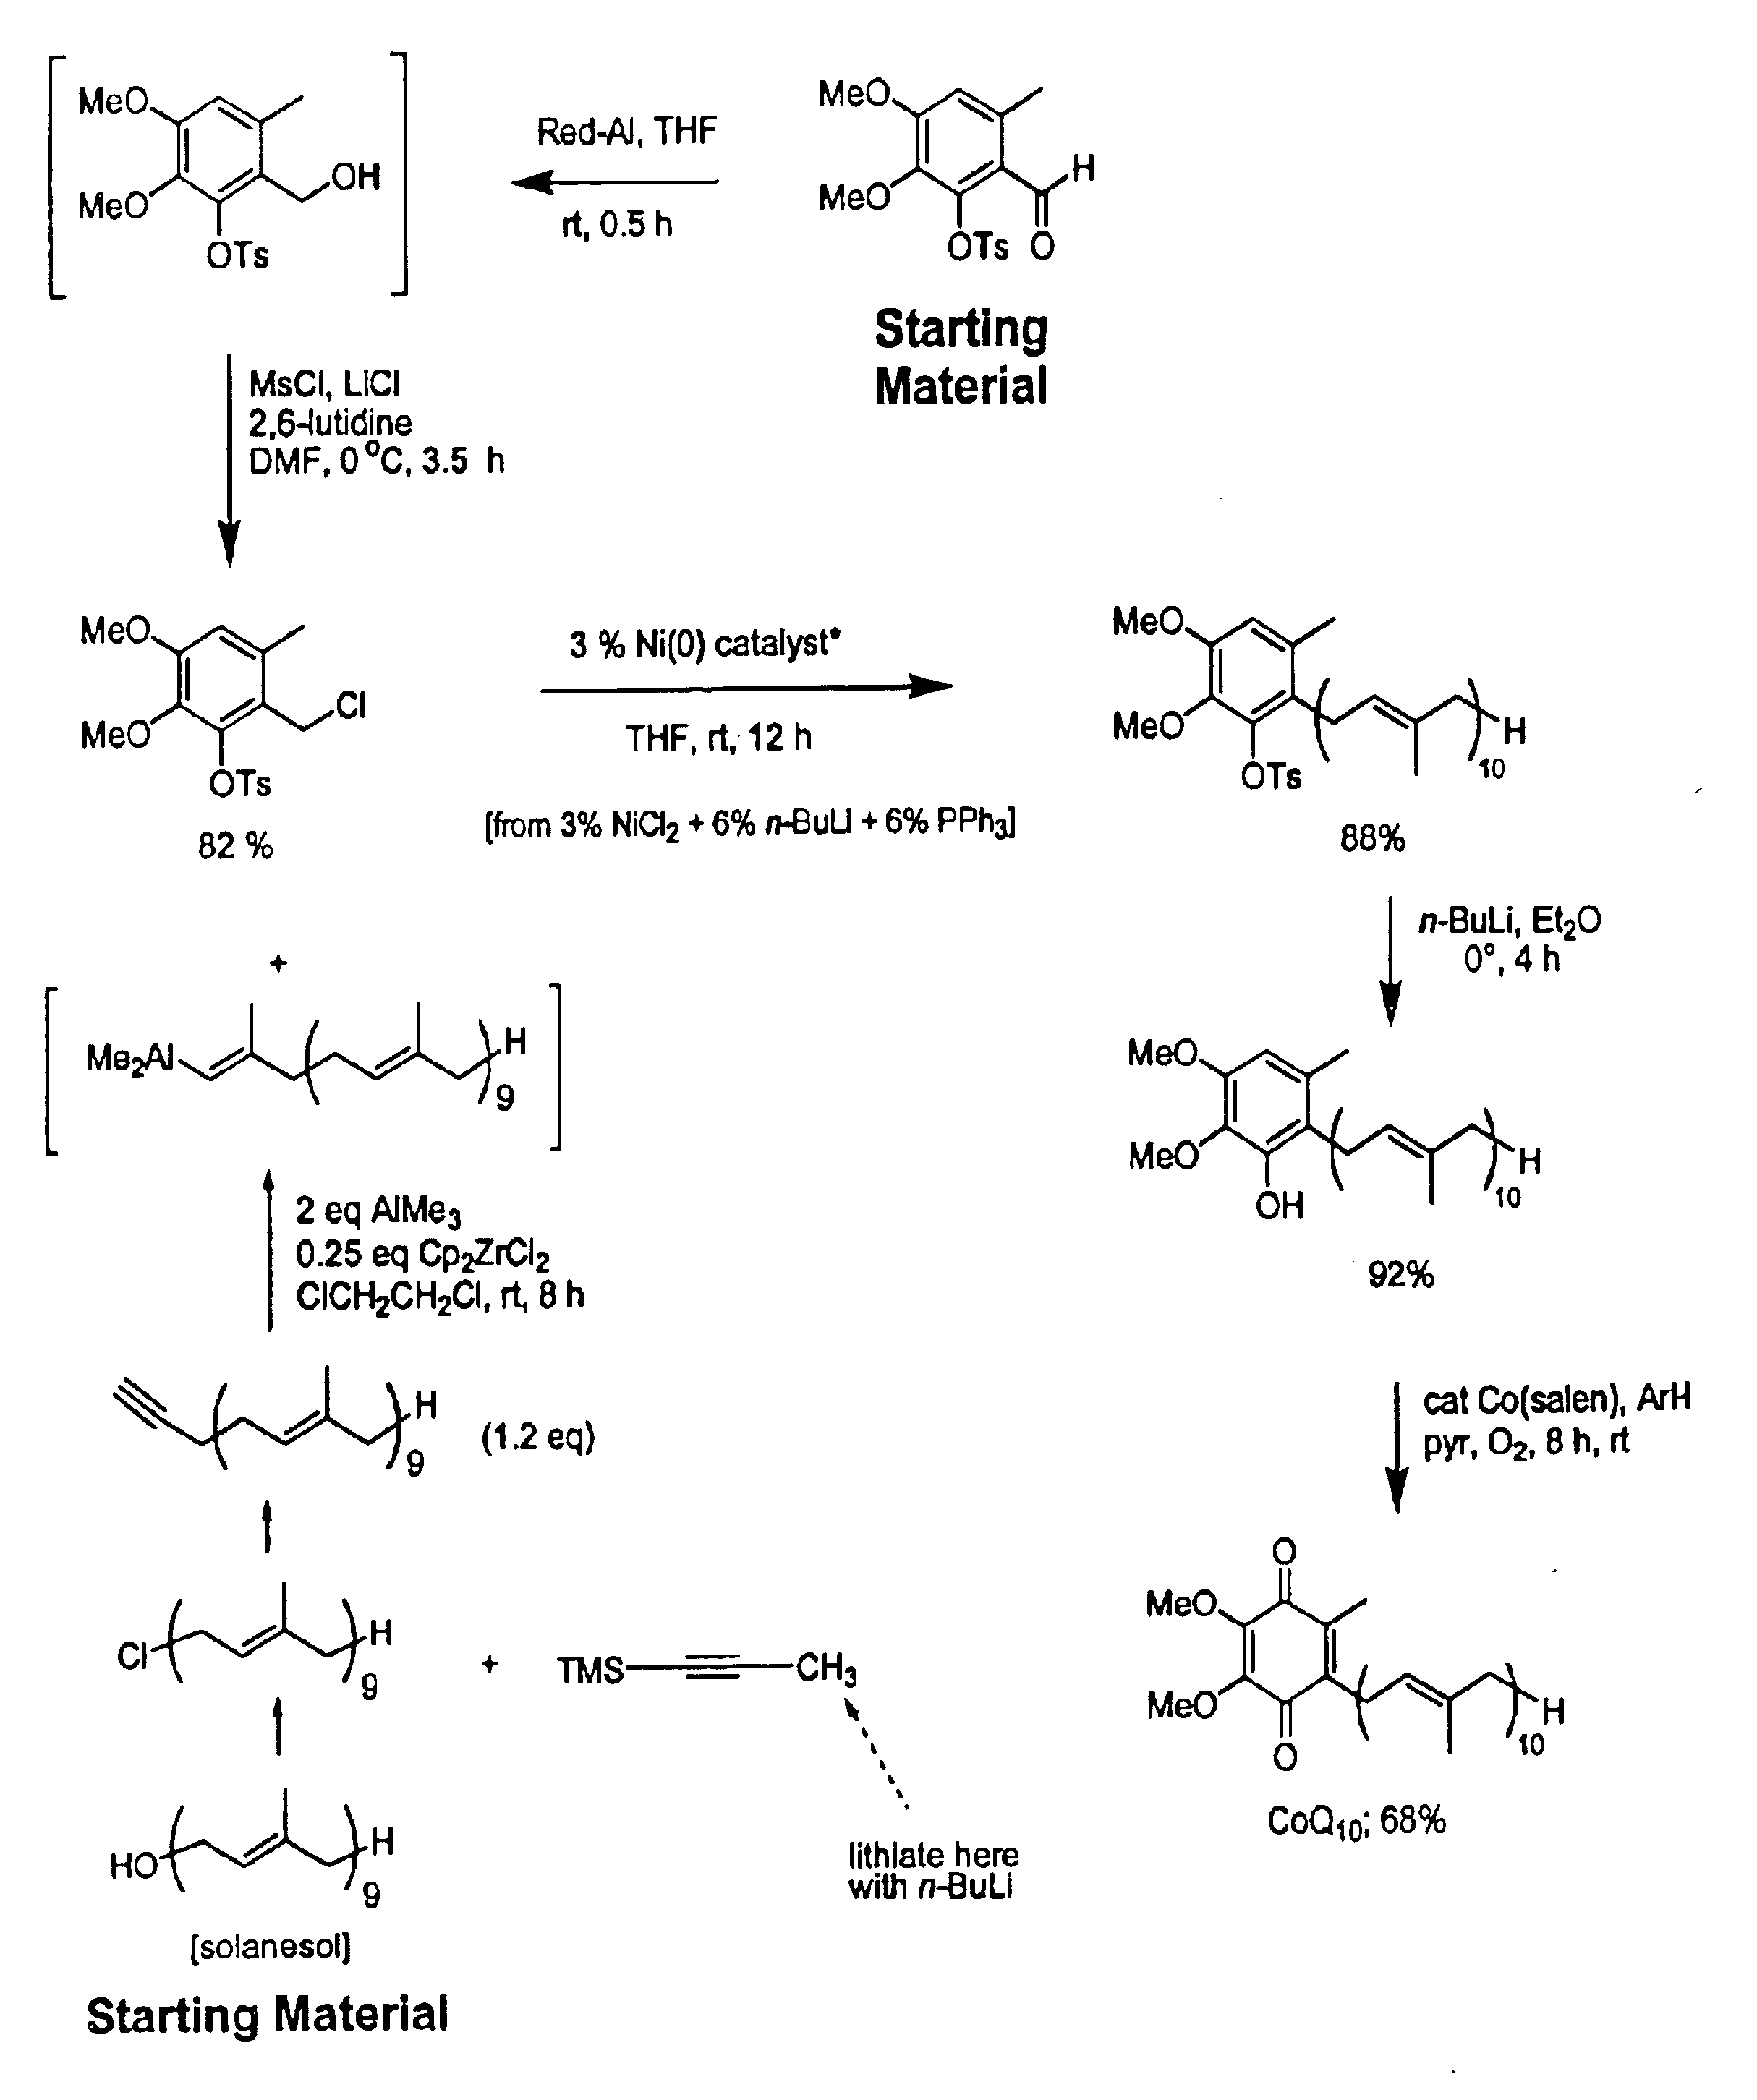 Practical, cost-effective synthesis of CoQ10